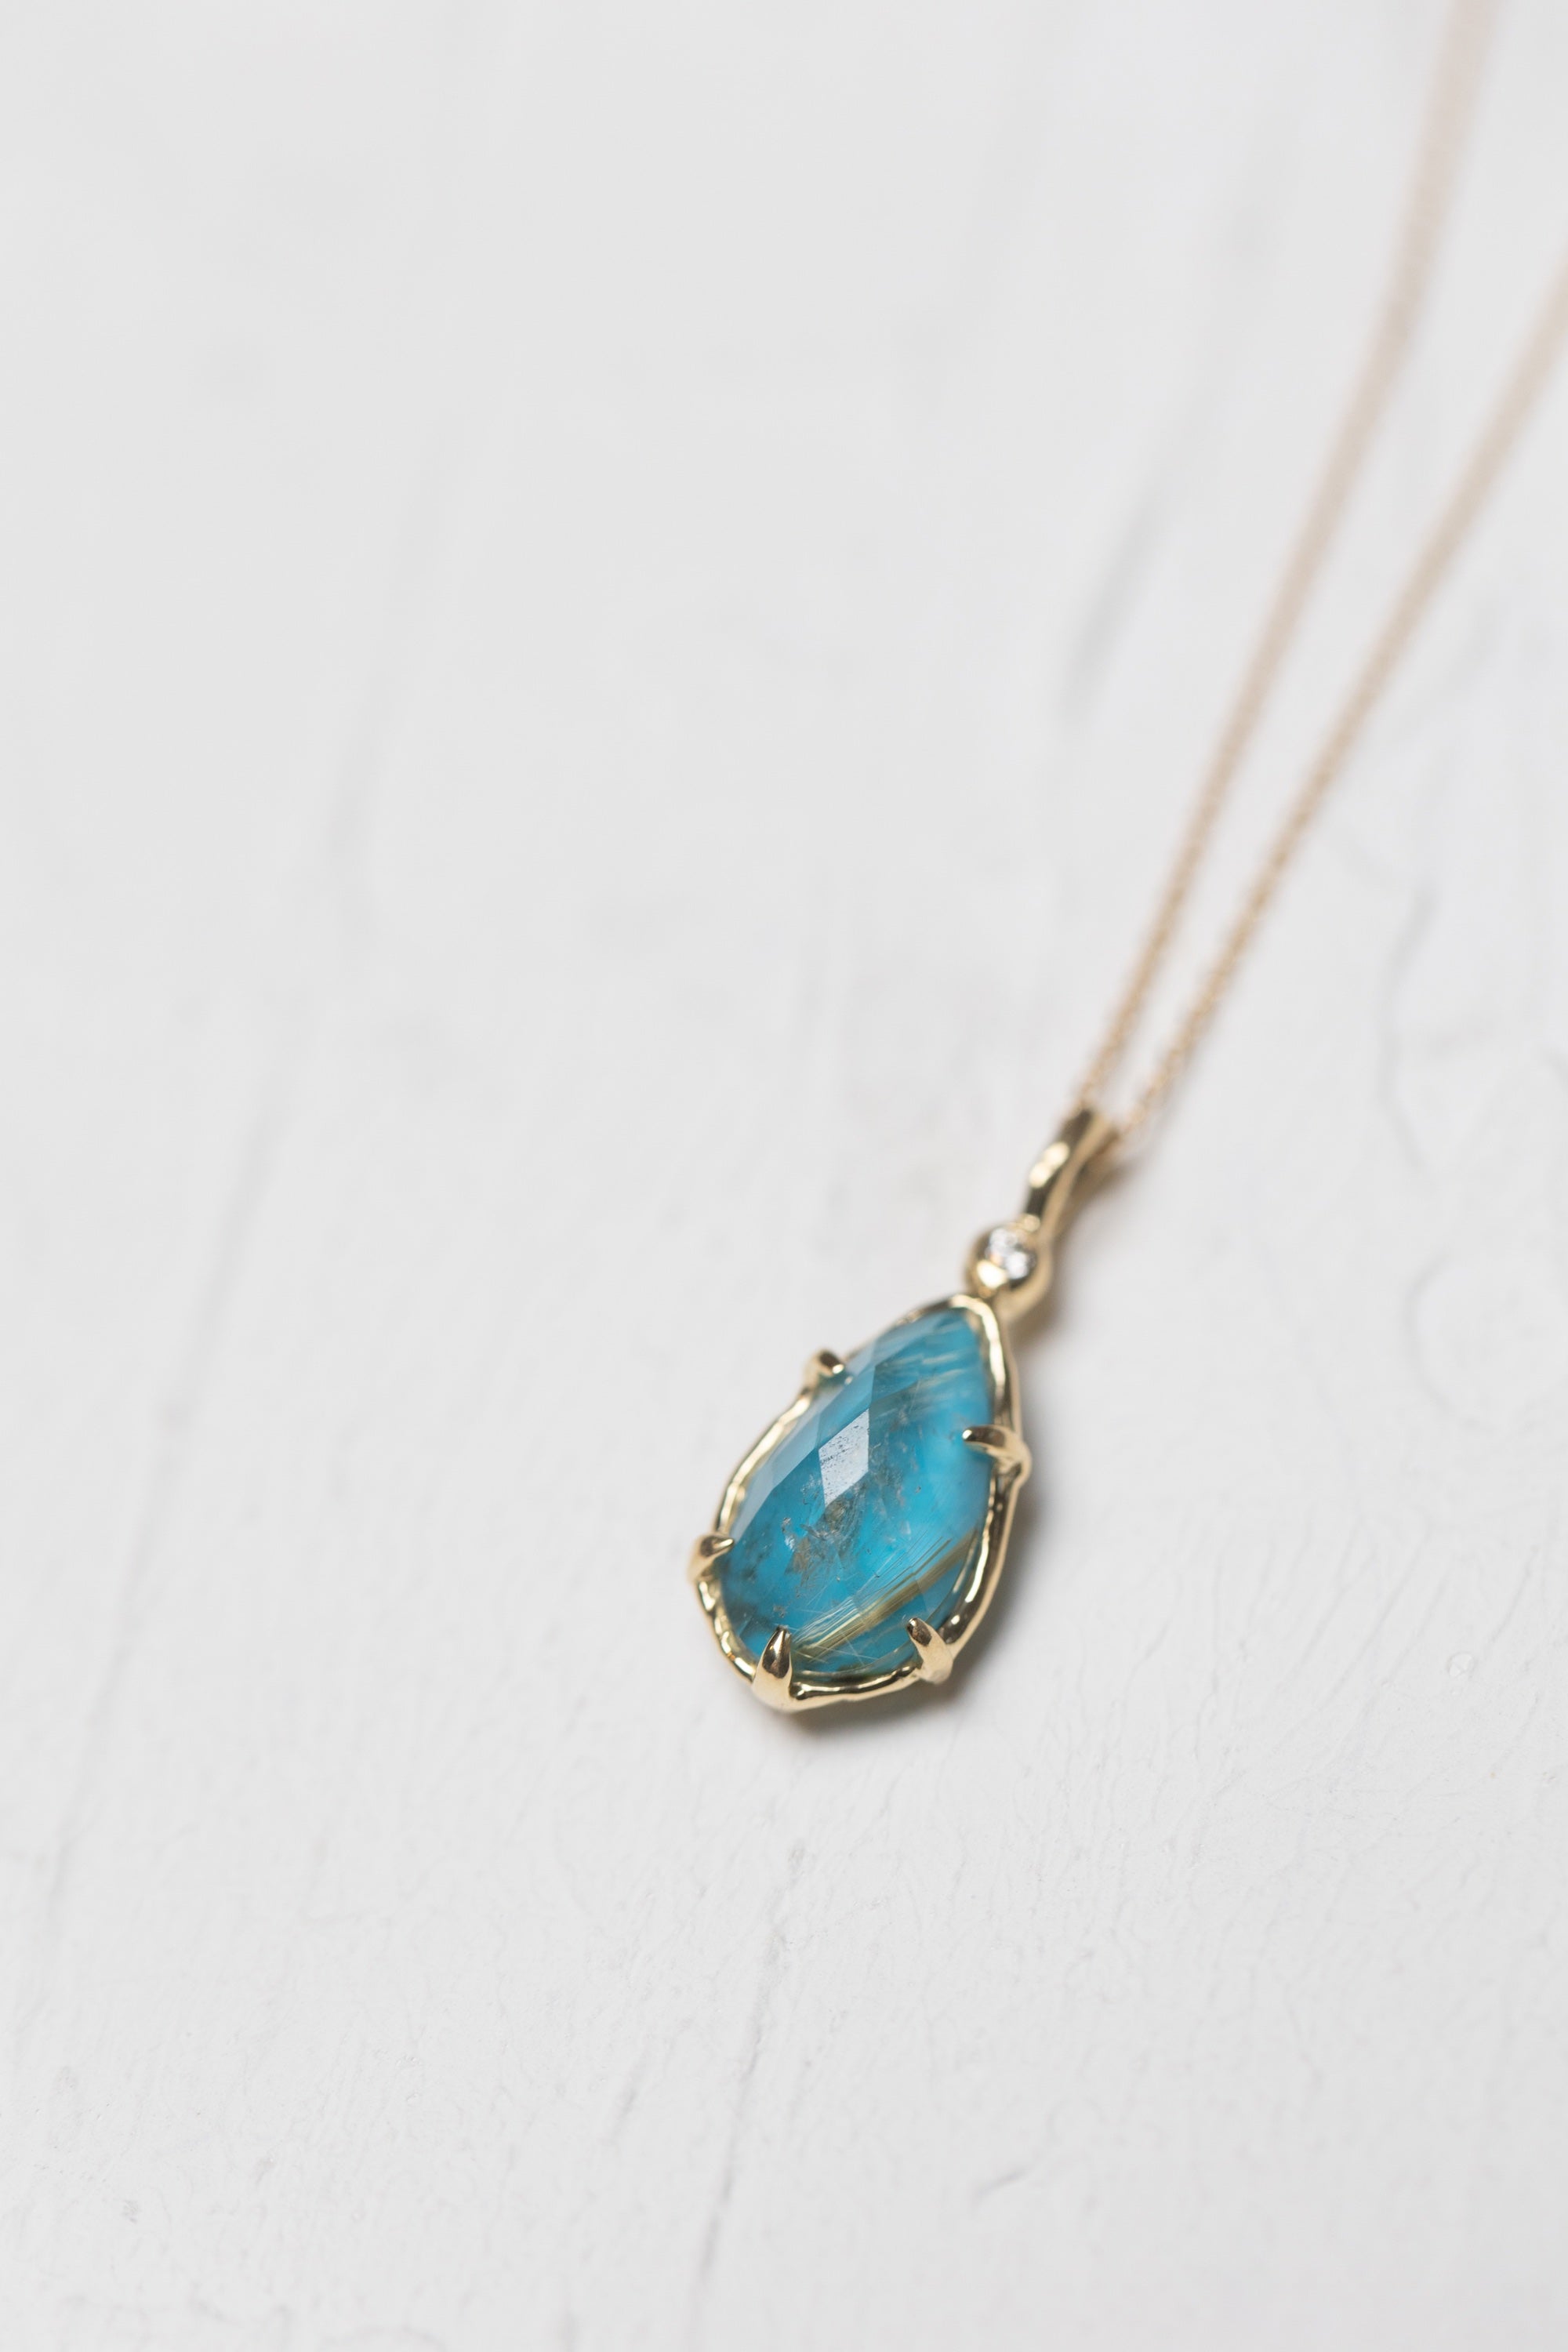 Tear-shaped Turquoise and Rutilated Quartz Doublet Necklace (18k)